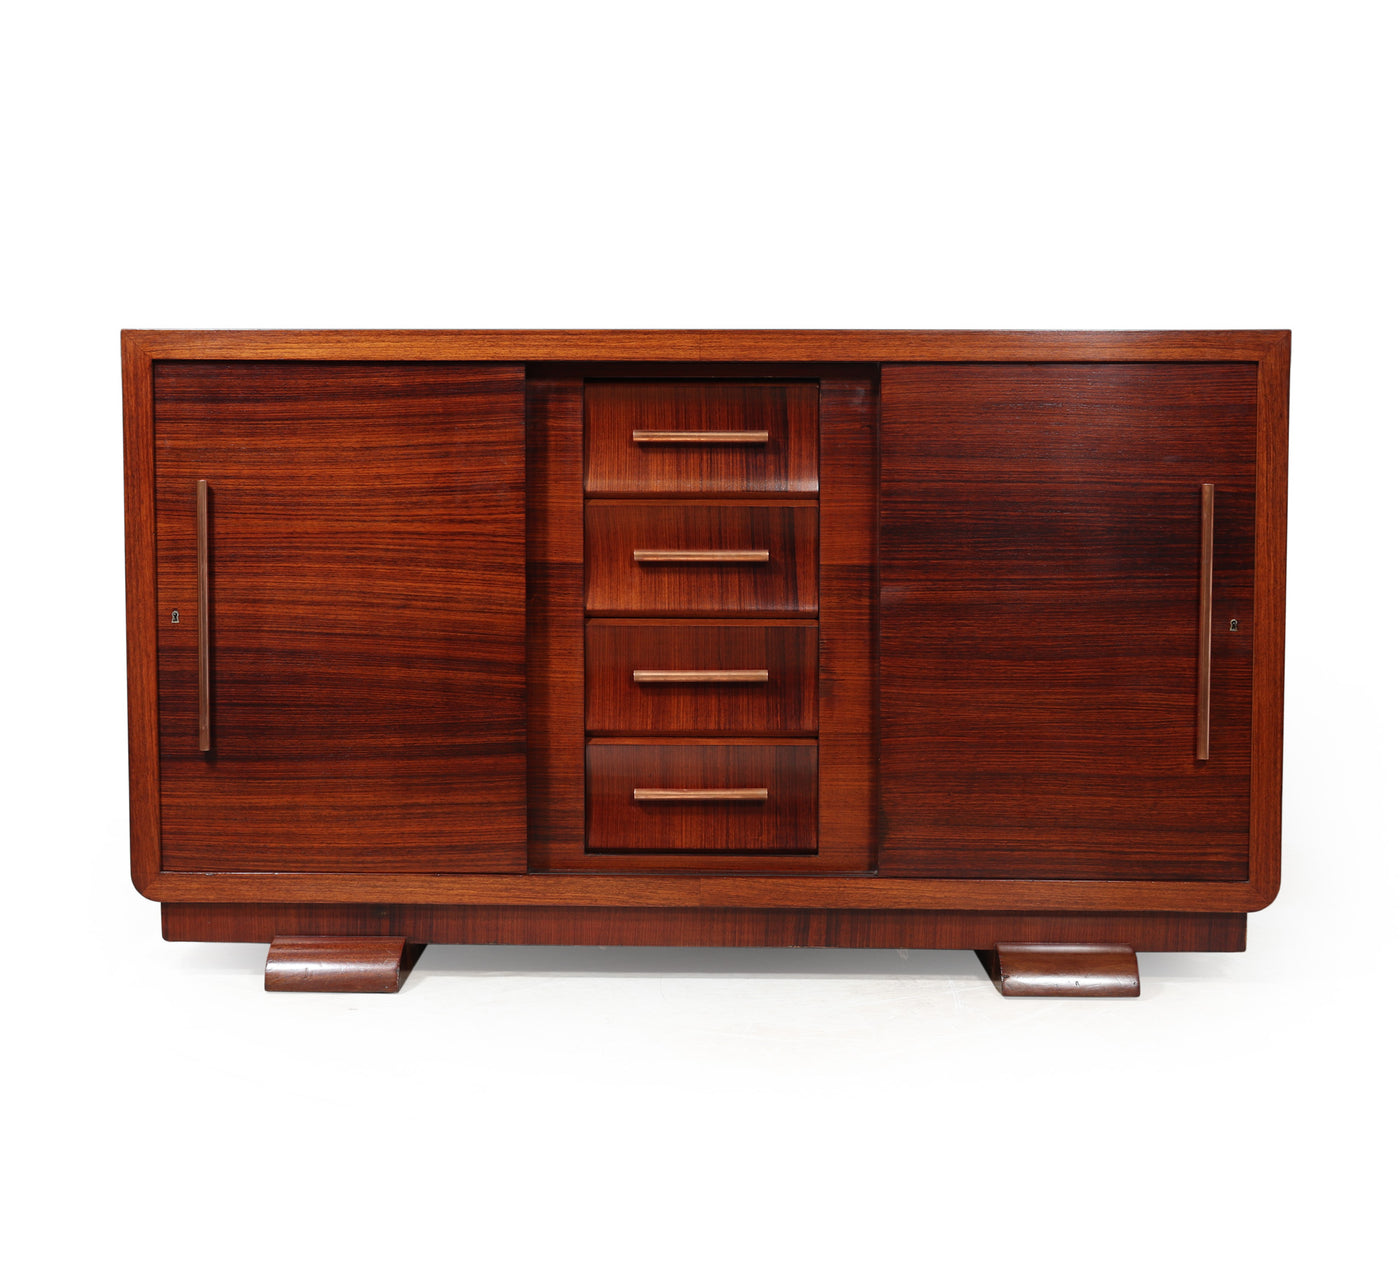 French Art Deco Sideboard with Sliding Doors